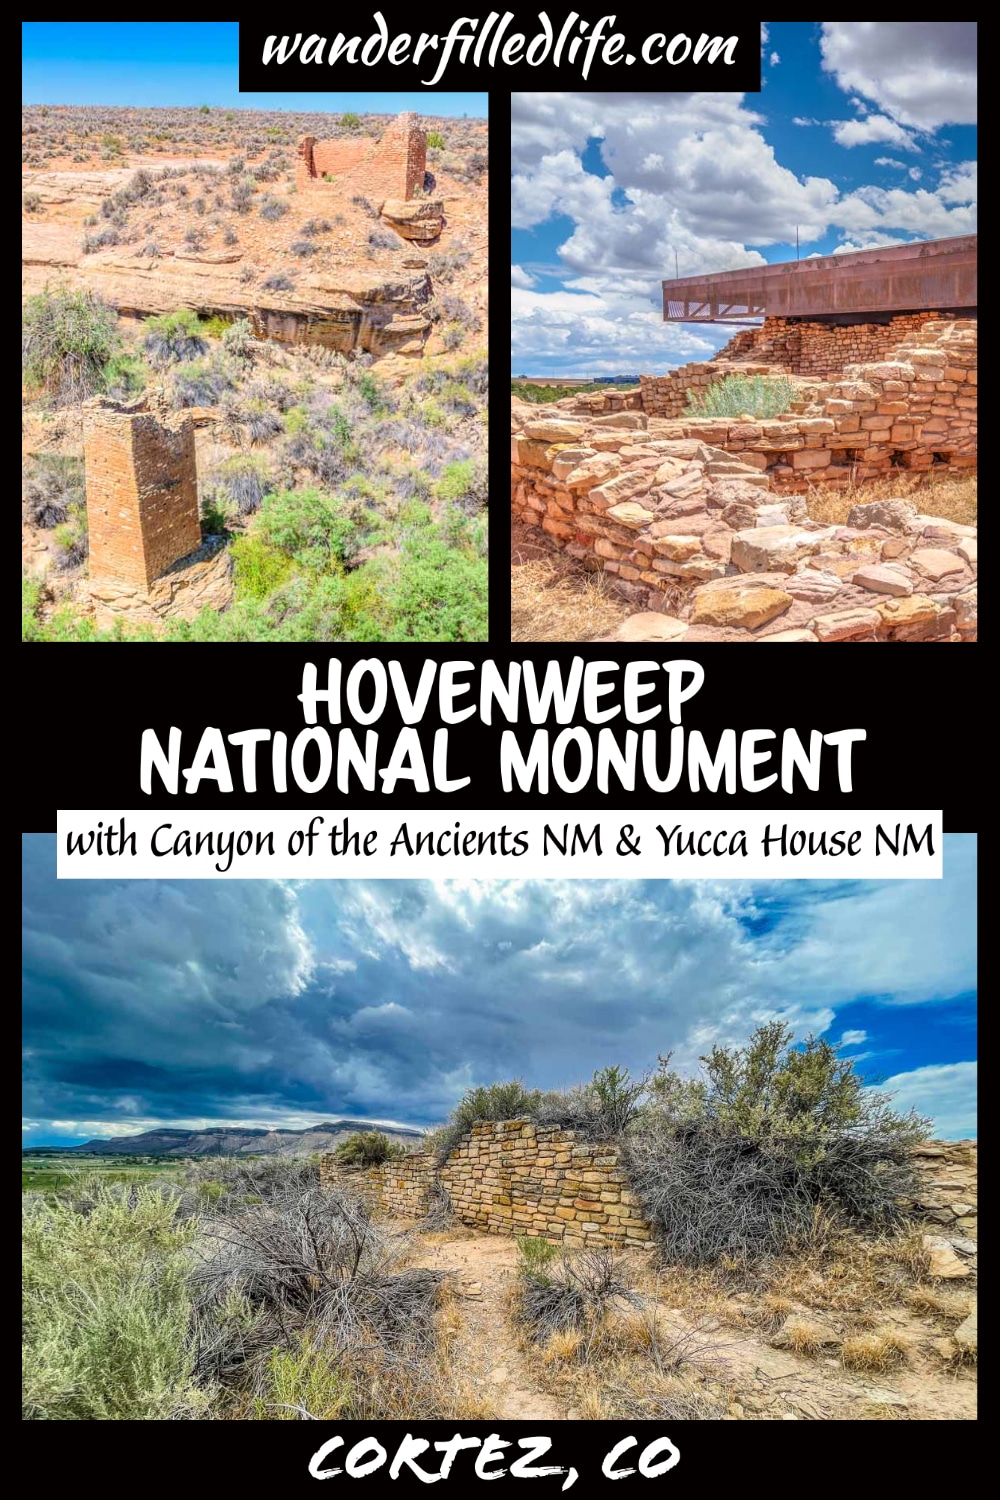 Hovenweep National Monument and the surrounding sites preserve several Ancestral Puebloan sites, preserving their history and culture.